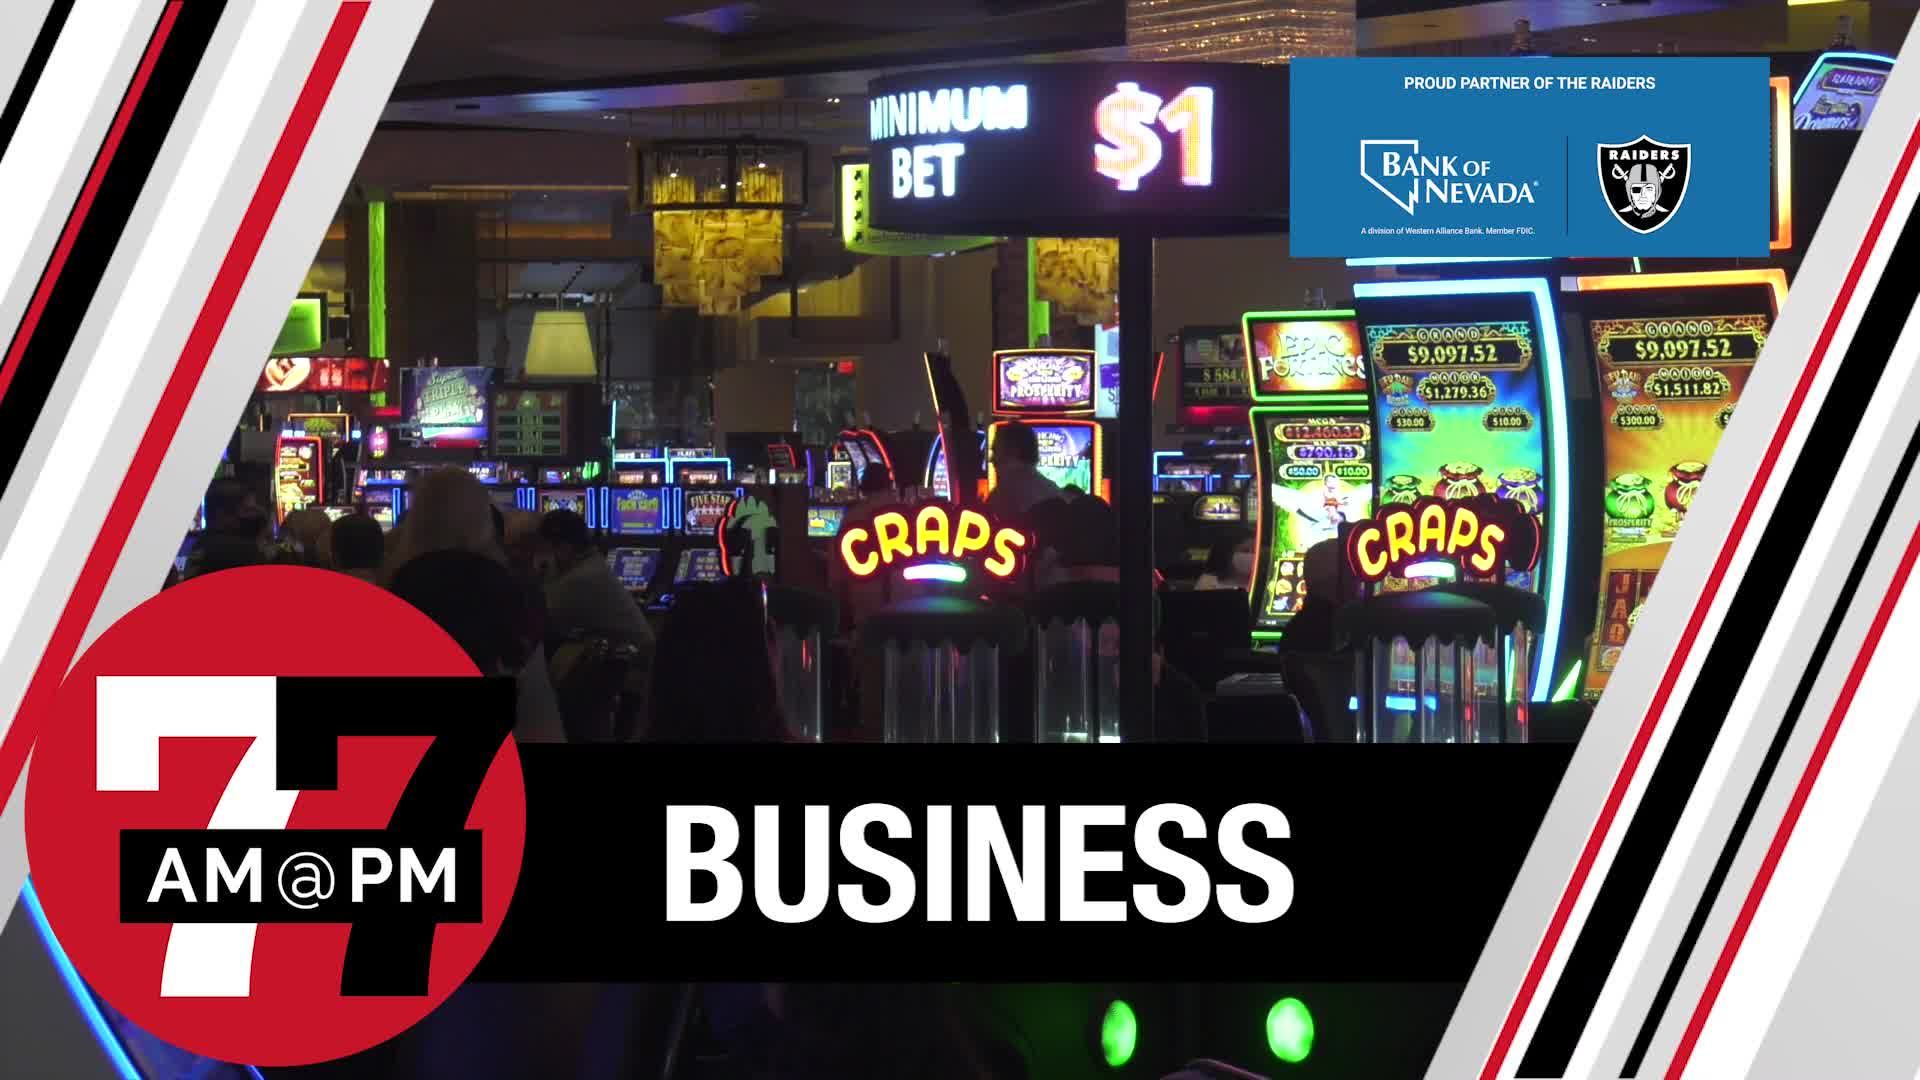 2021 Record Year for Casino Industry